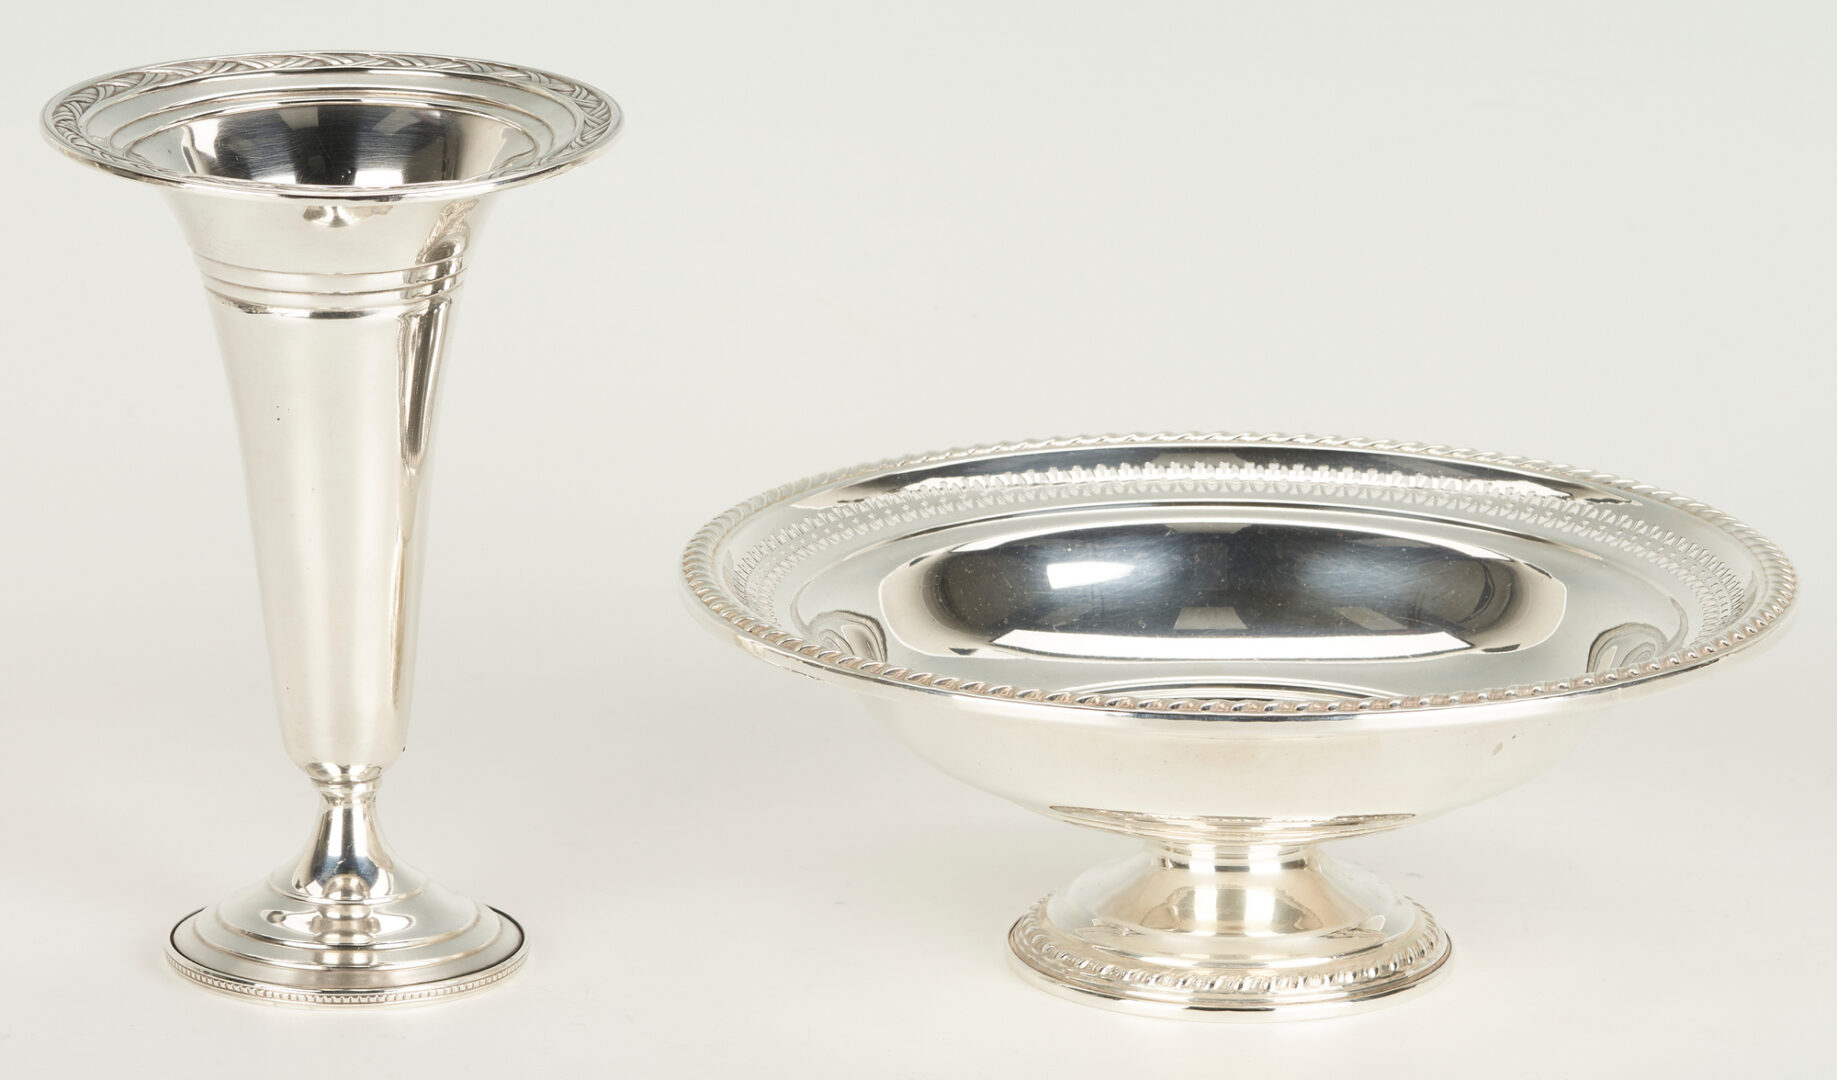 Lot 1203: 8 Sterling Silver Hollowware Items w/ Weighted Bases, incl. 6 Hirsch Sherbets, Webster Co. Vase, La Pierre Compote